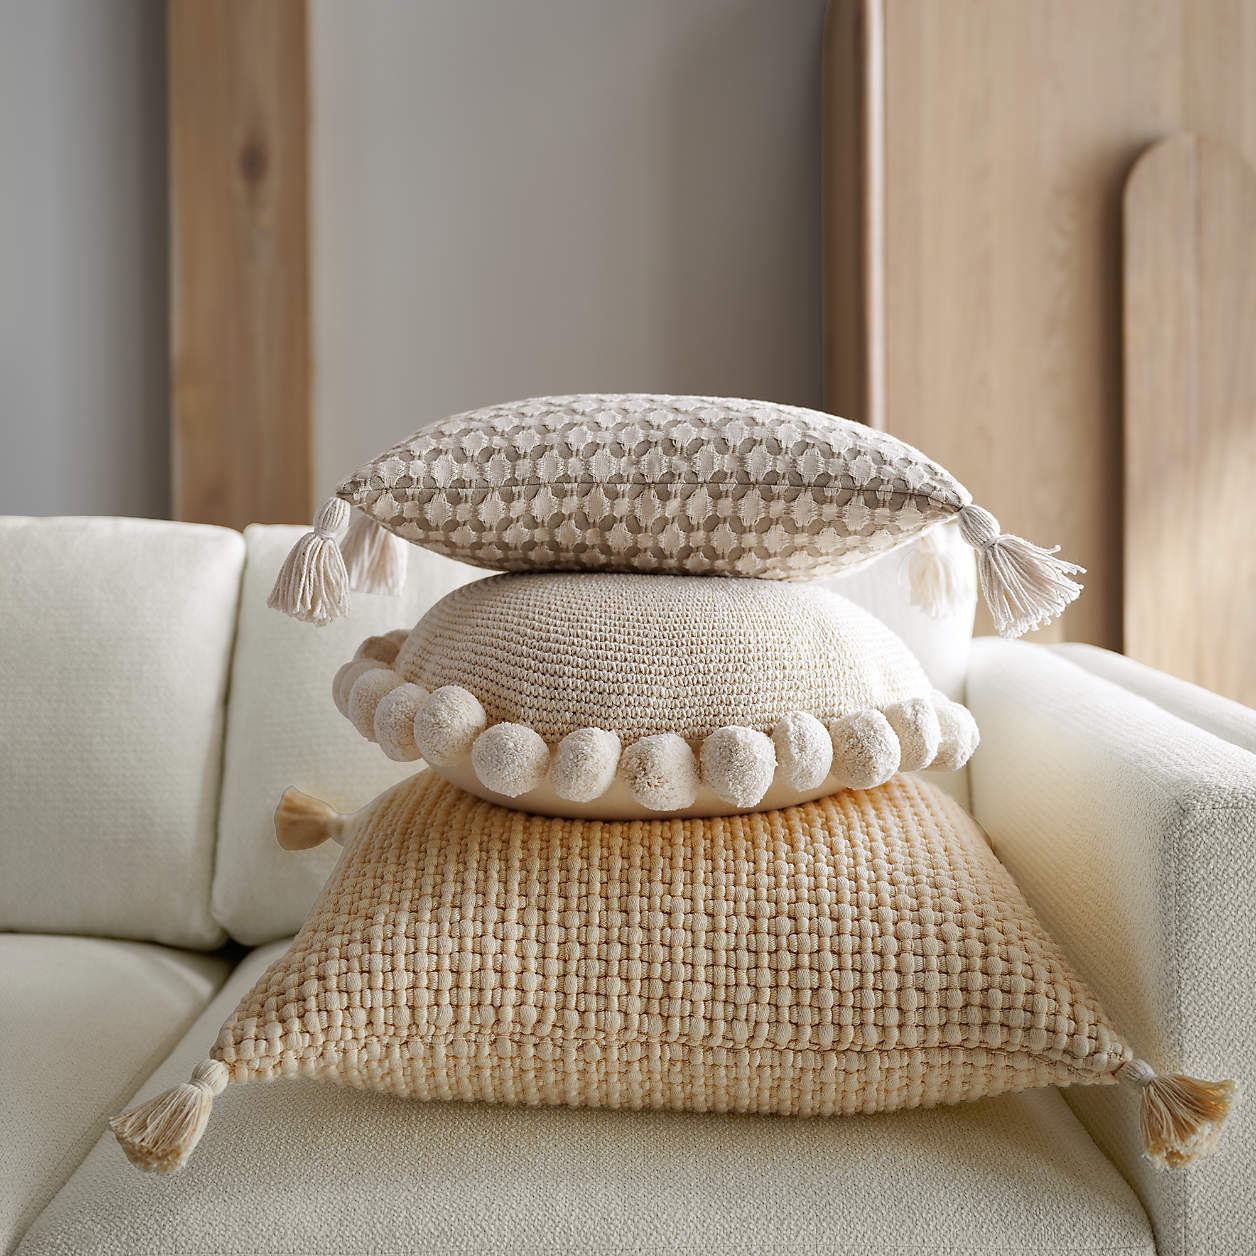 Tahona Textured Pillow with Feather-Down Insert, White Swan, 18" x 12" - Image 3